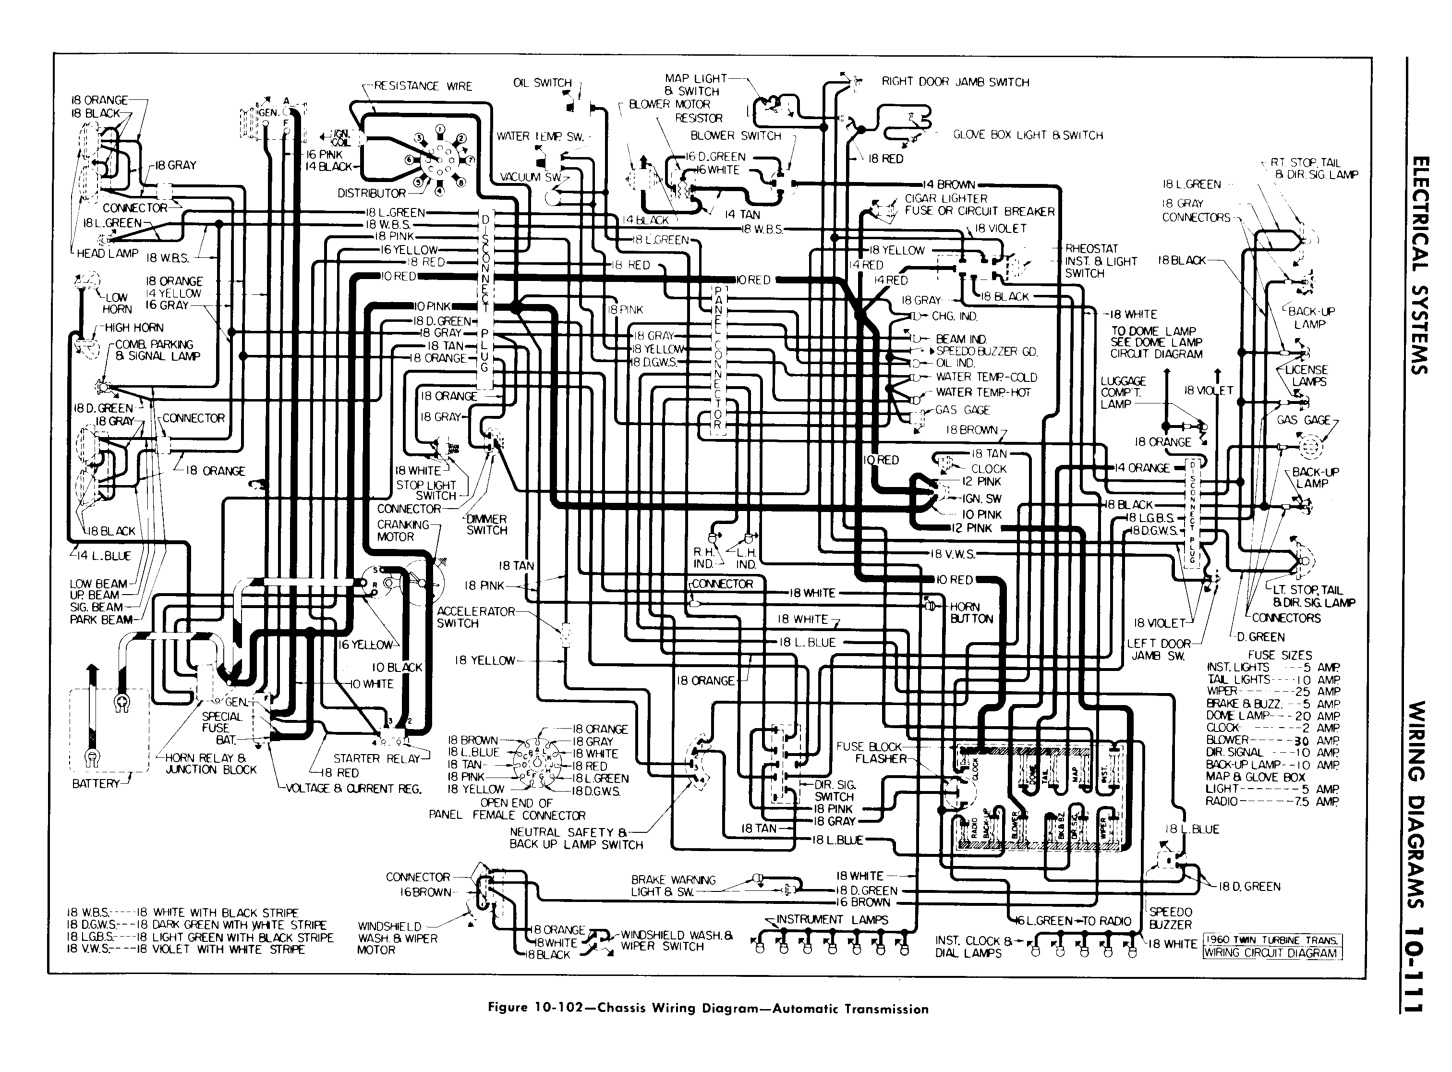 n_11 1960 Buick Shop Manual - Electrical Systems-111-111.jpg